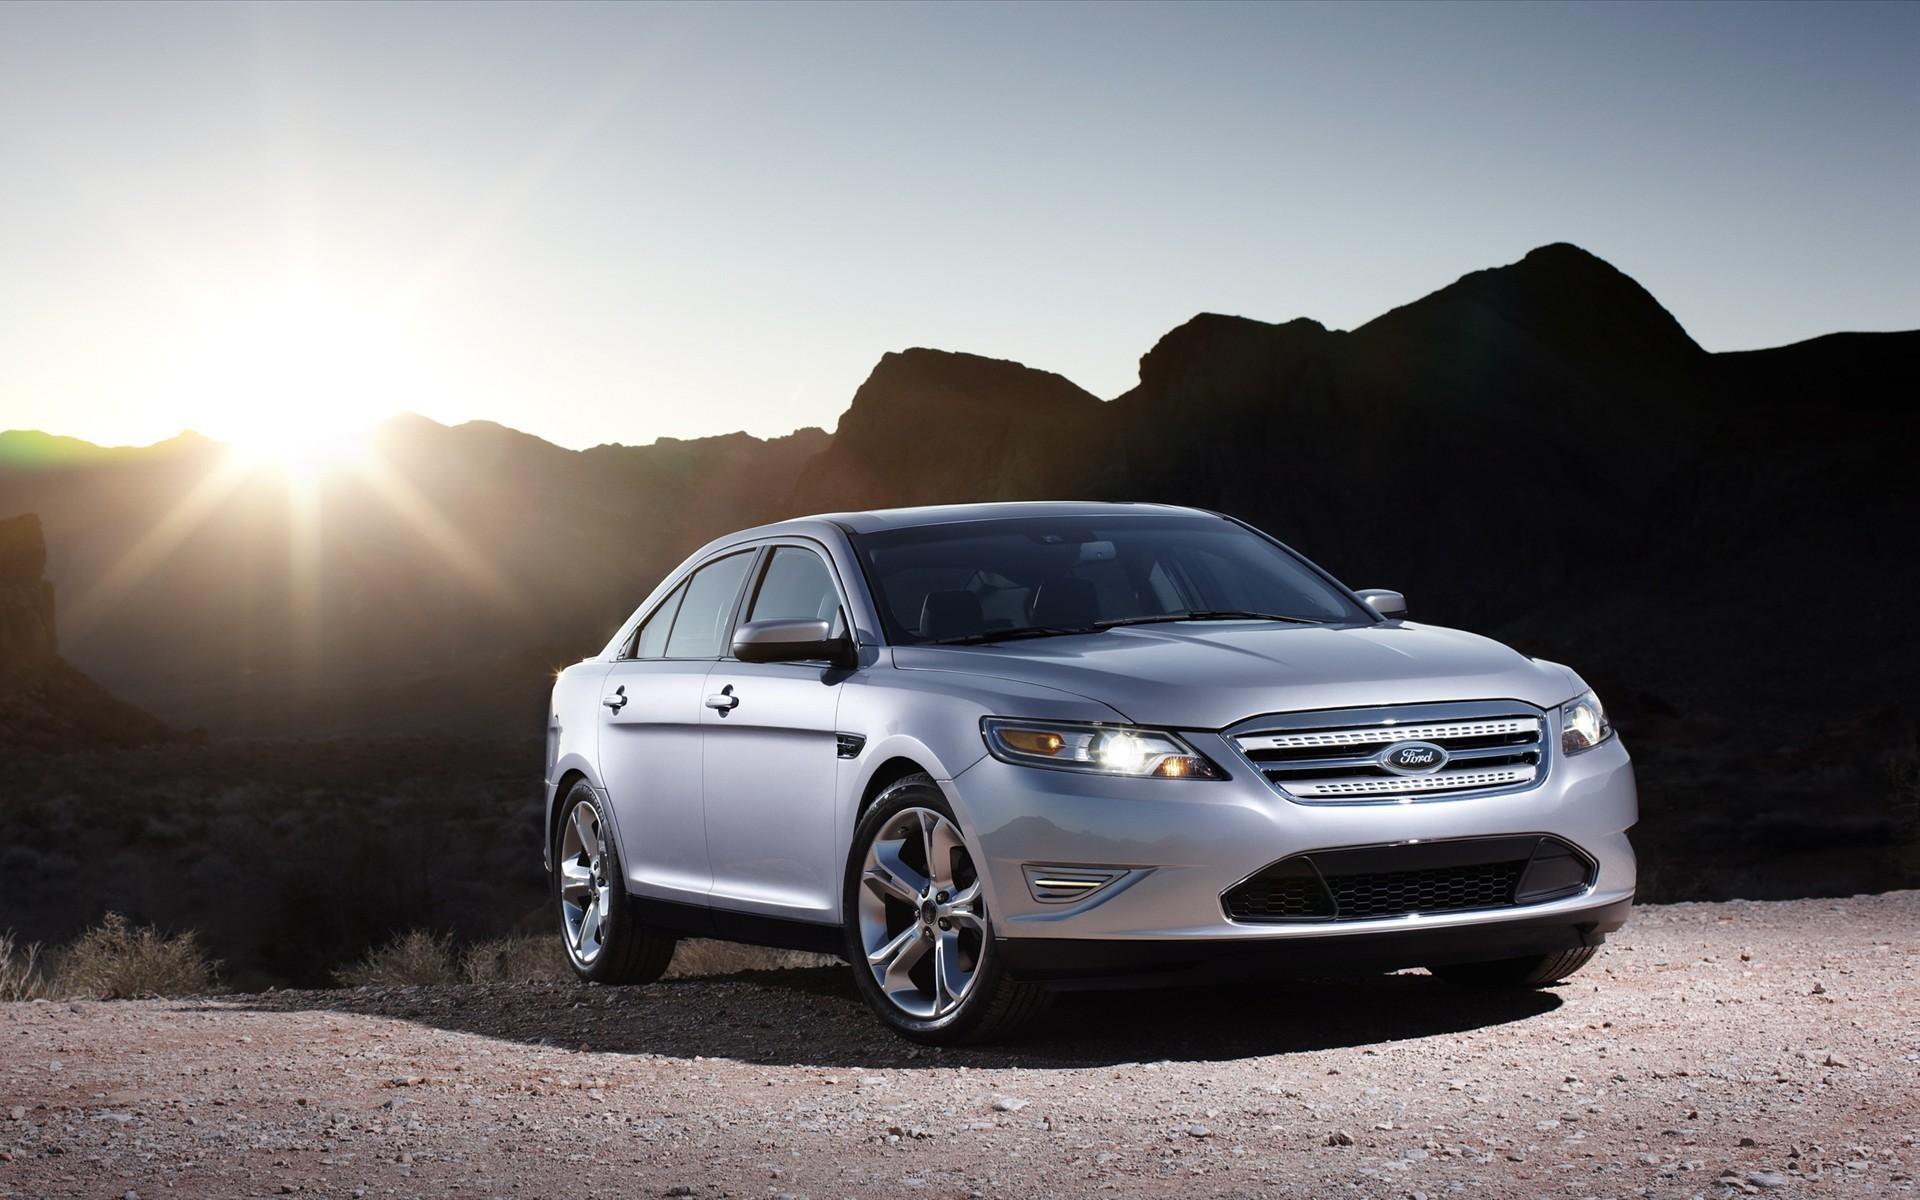 2013 Ford Taurus Sho Wallpapers